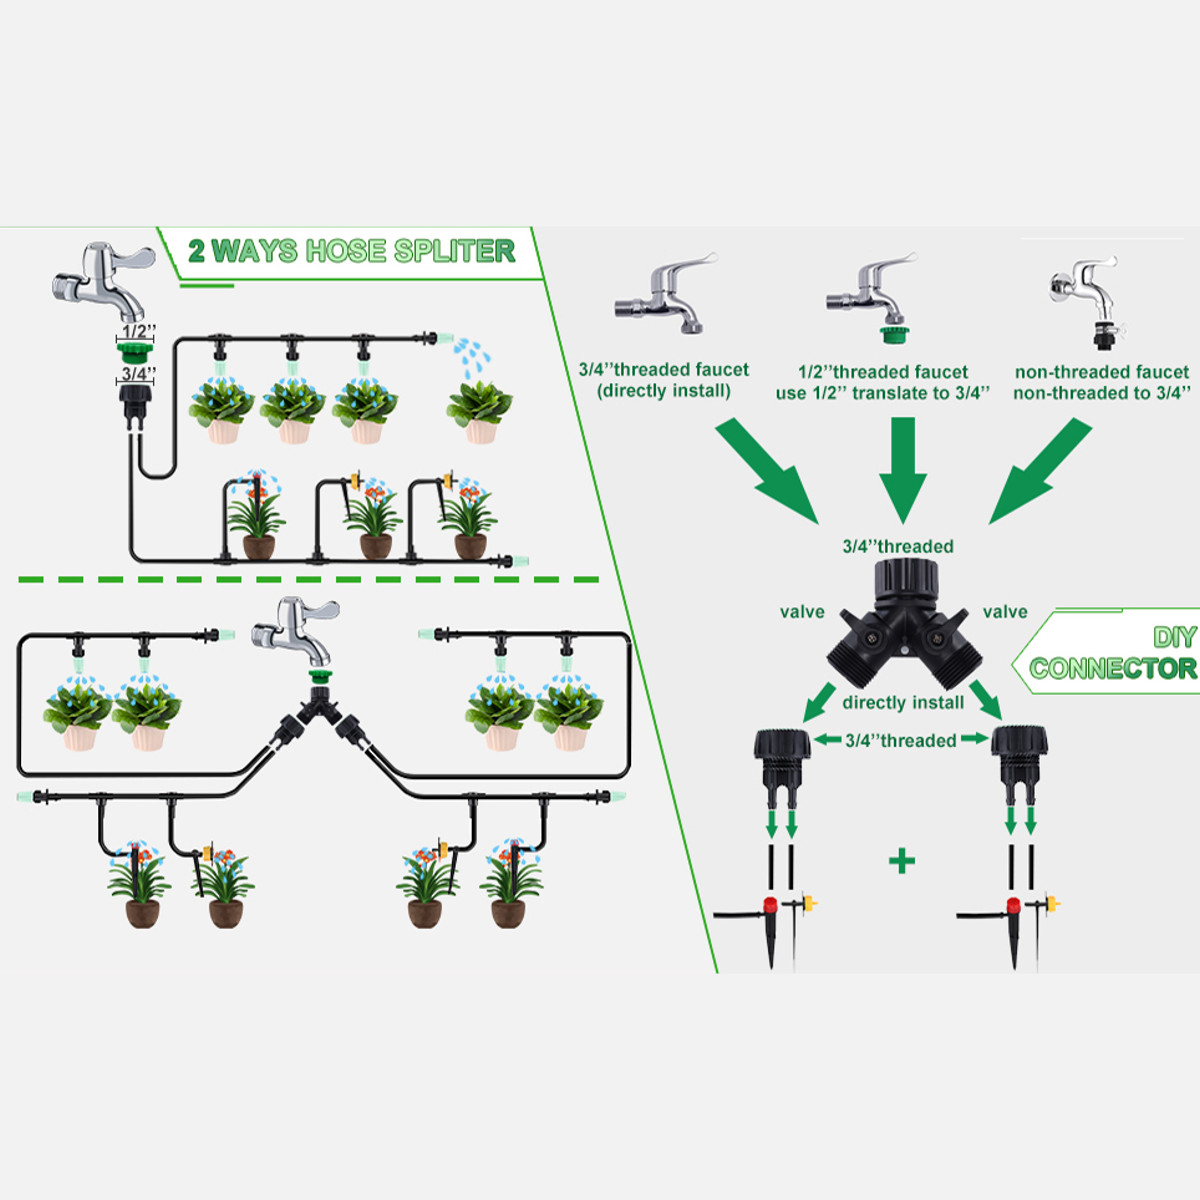 CAVEEN-131Ft40M-Automatic-Drip-Irrigation-DIY-Garden-Plant-Watering-Kit-Micro-Drip-Irrigation-System-1897661-7